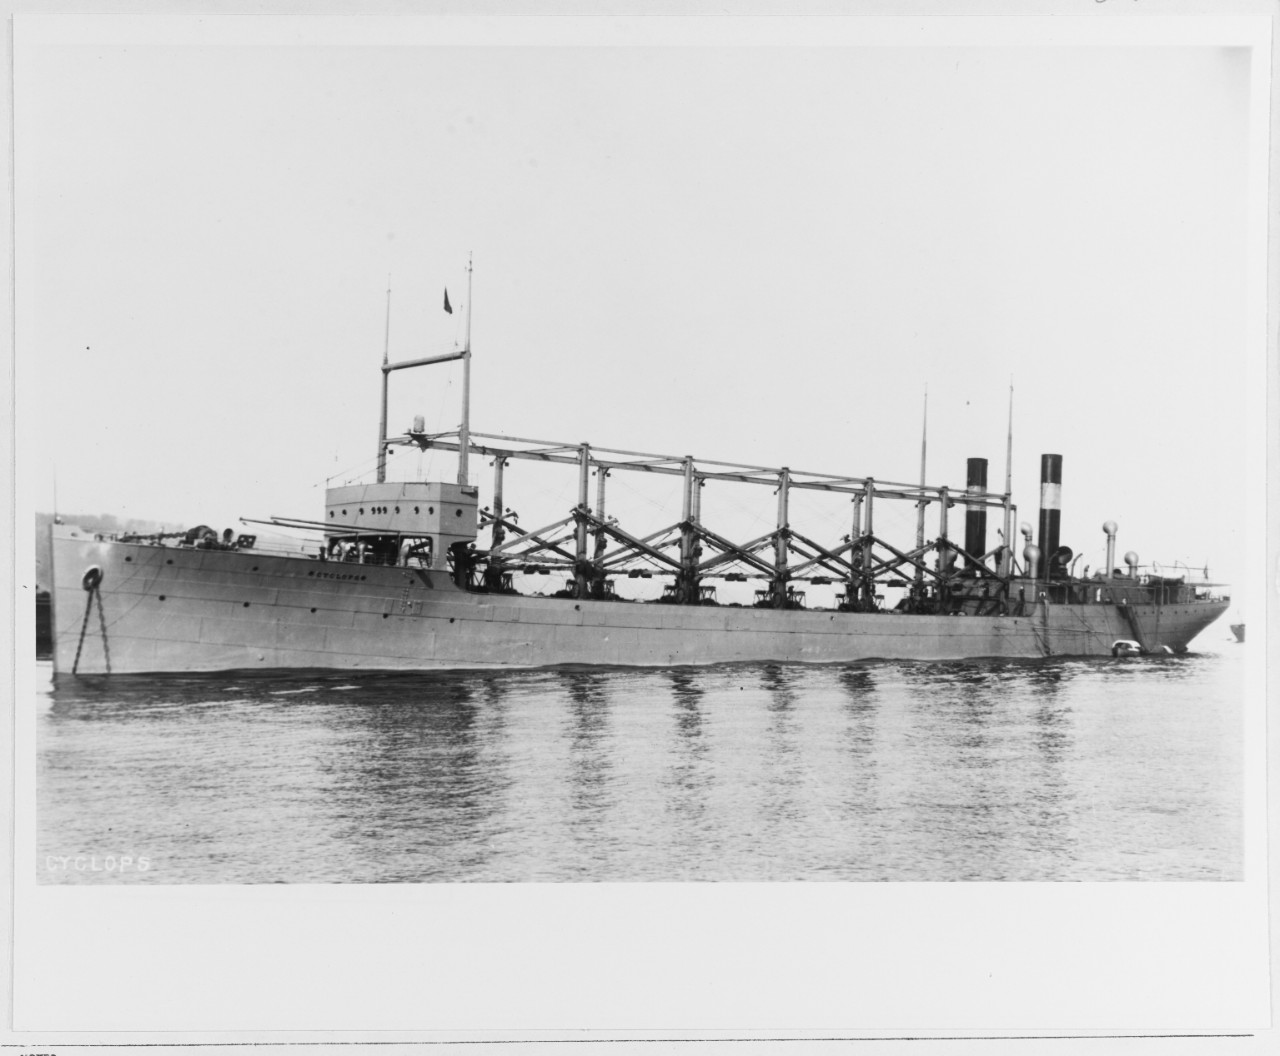 Photograph of the collier